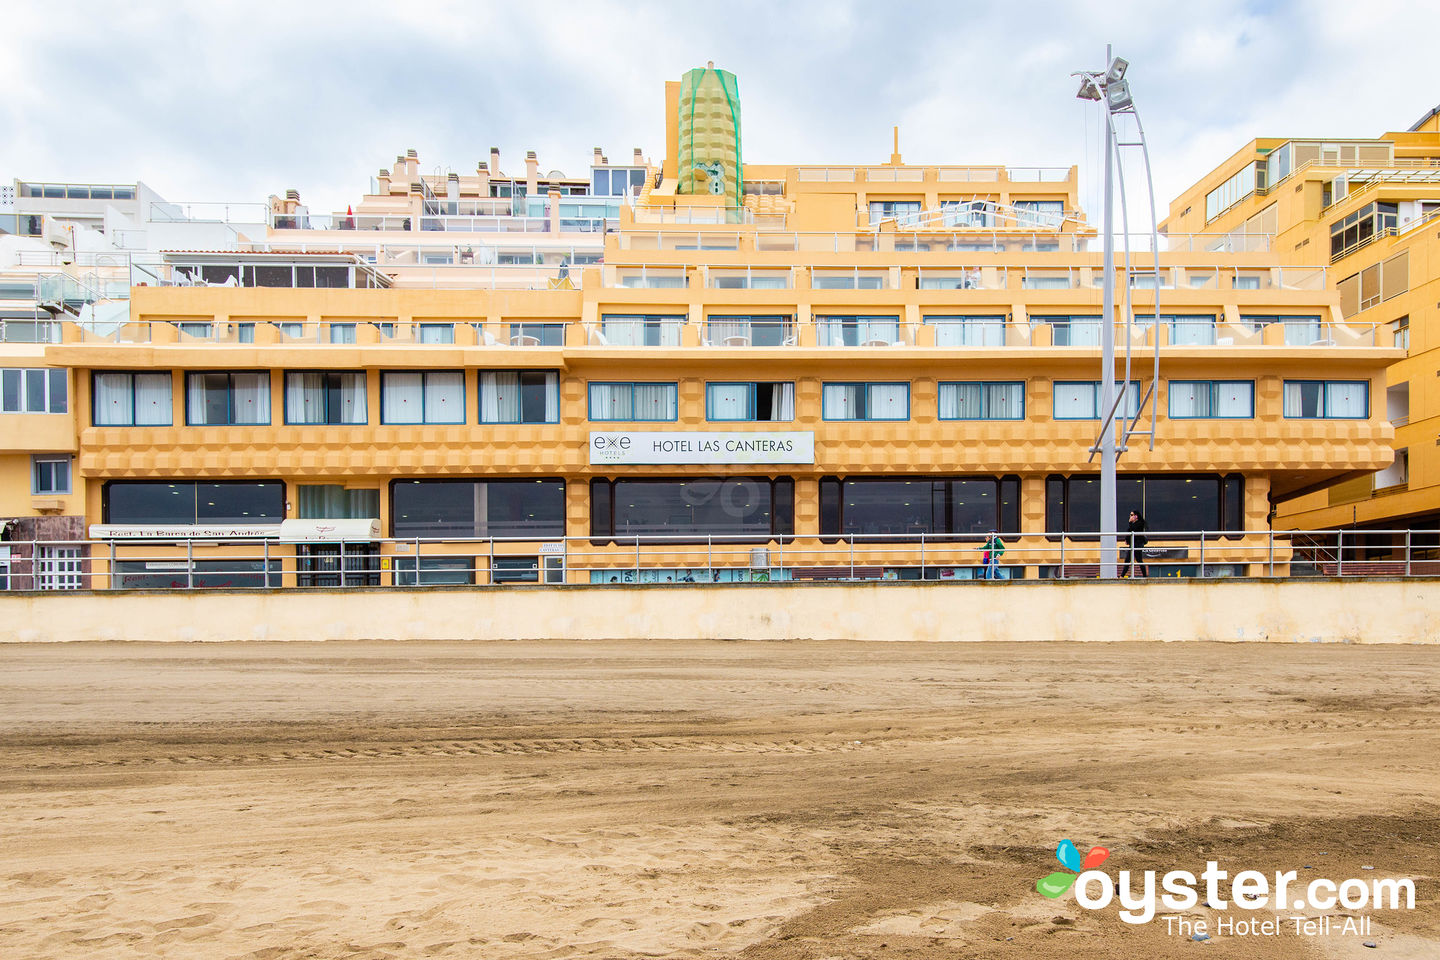 Hotel Las Canteras Review: What To REALLY Expect Stay